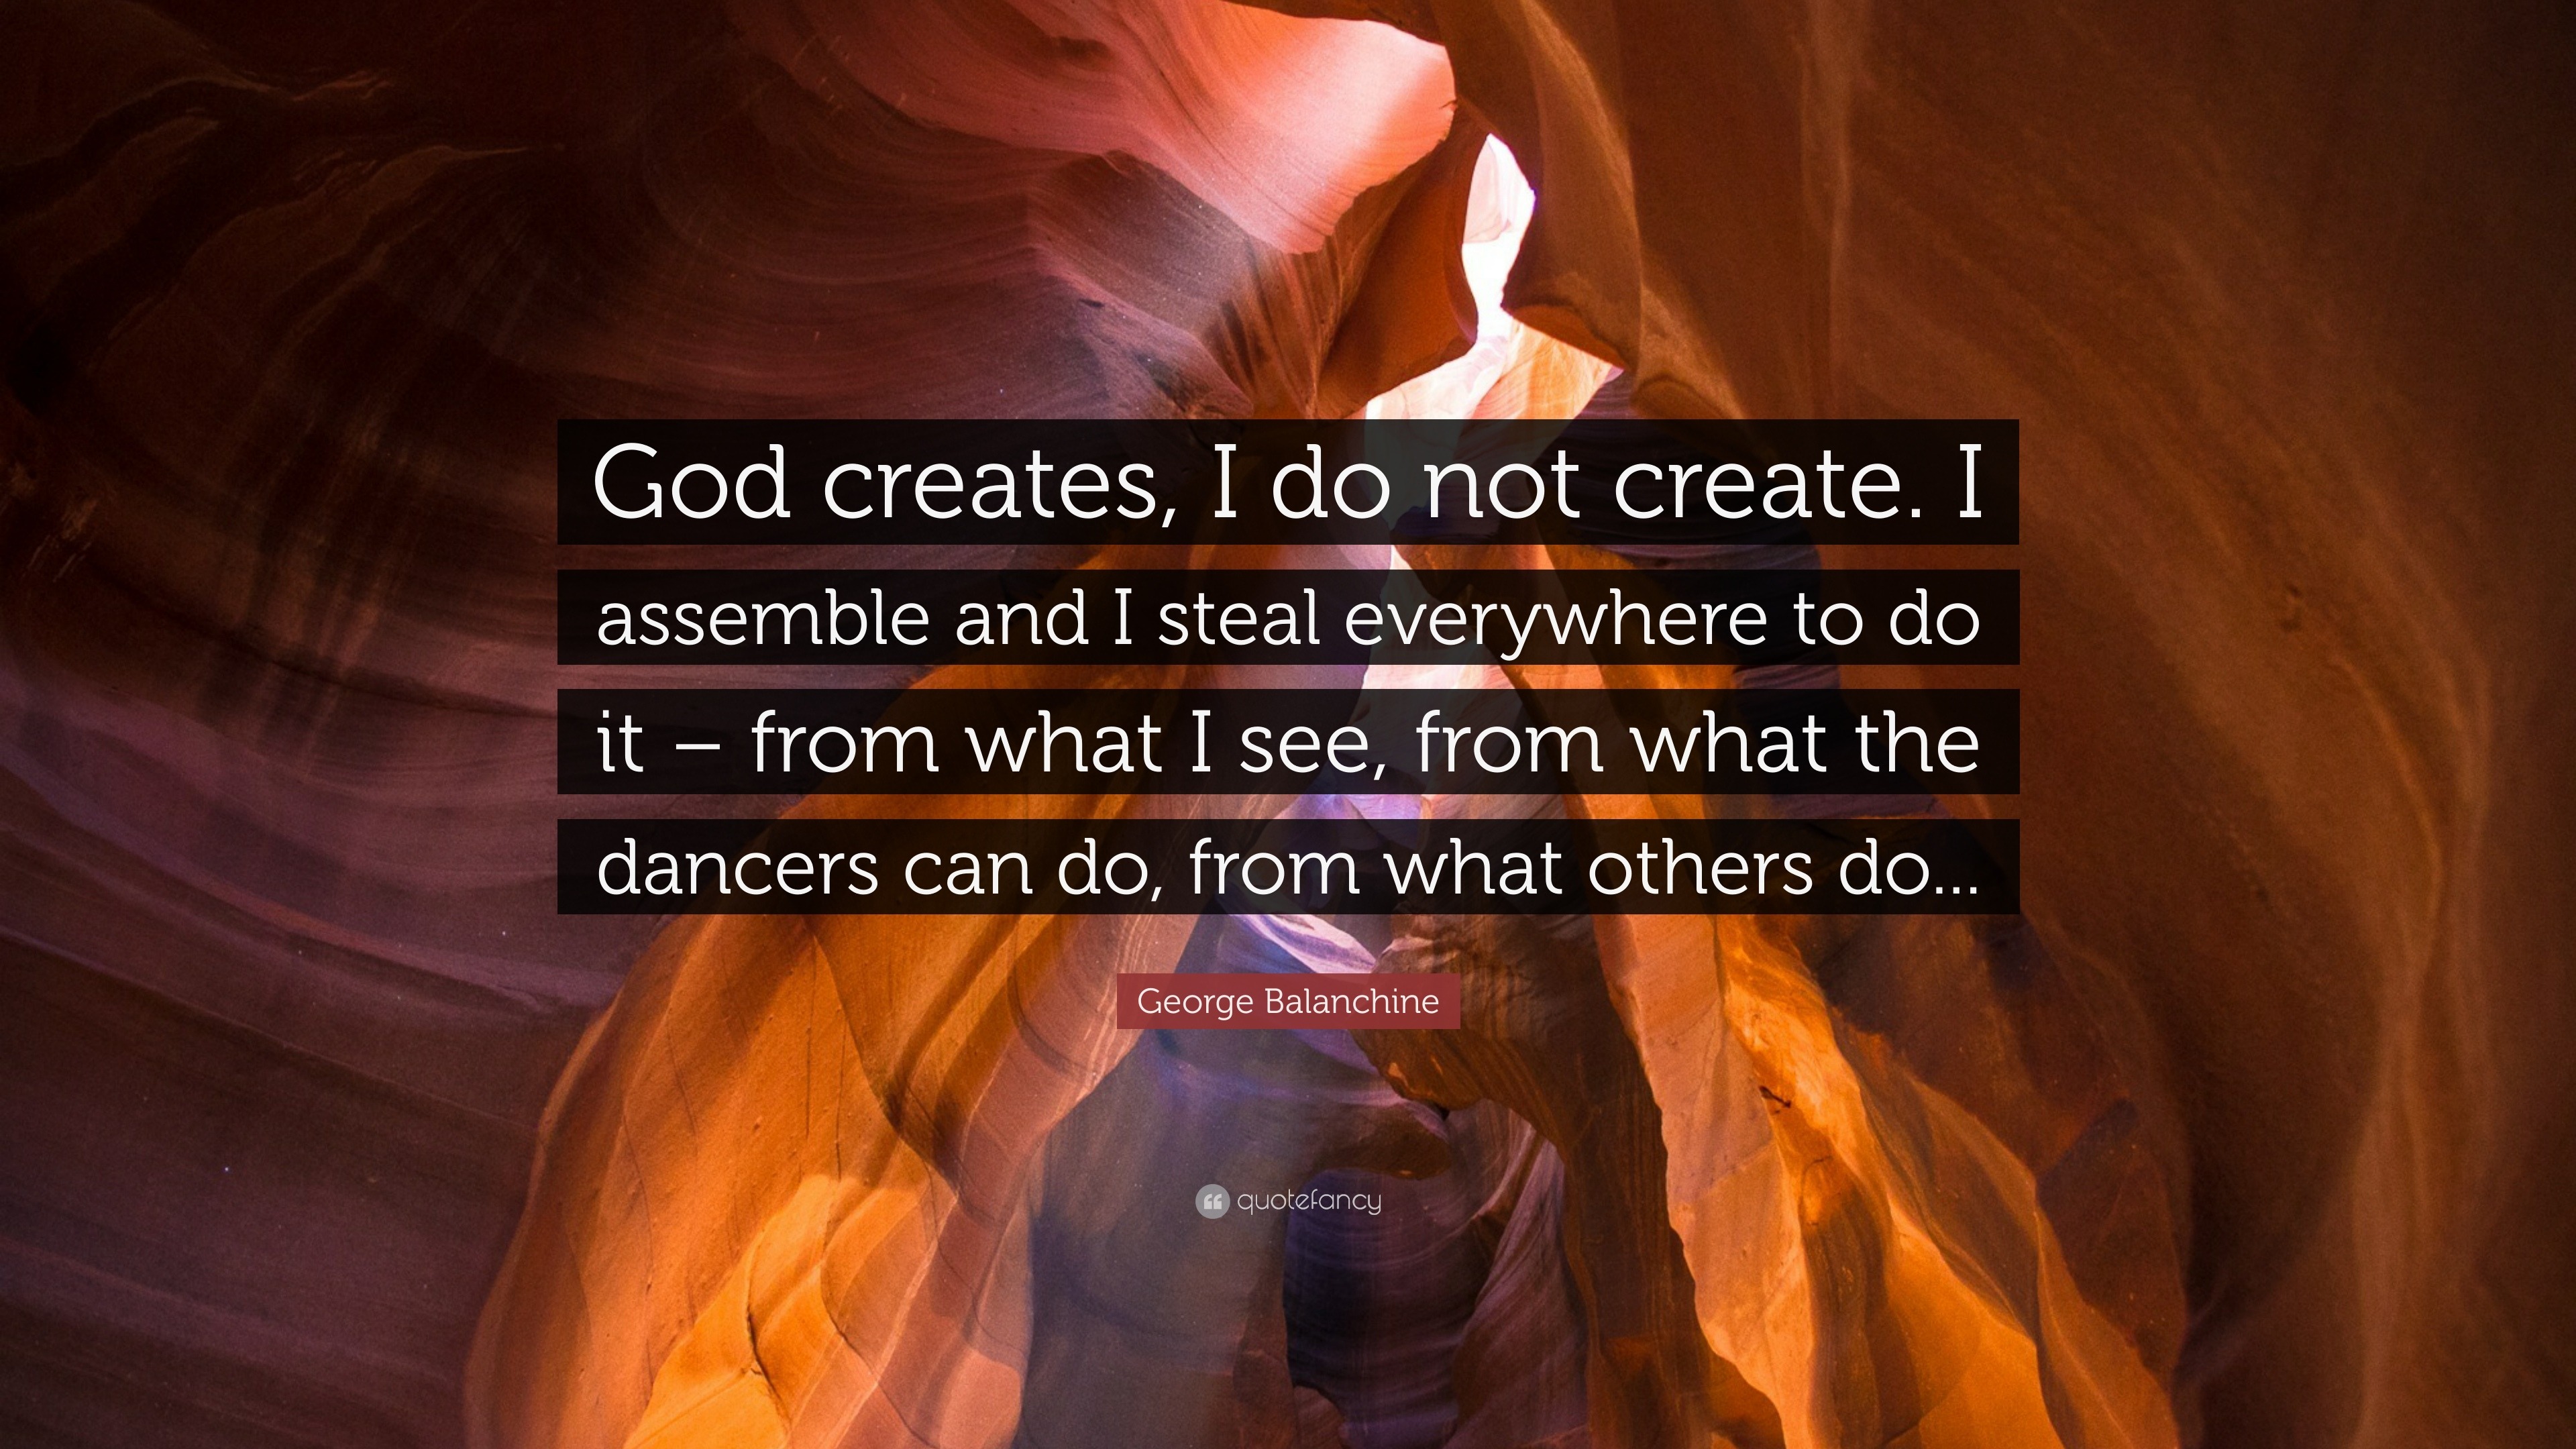 George Balanchine Quote God Creates I Do Not Create I Assemble And I Steal Everywhere To Do It From What I See From What The Dancers Can Do